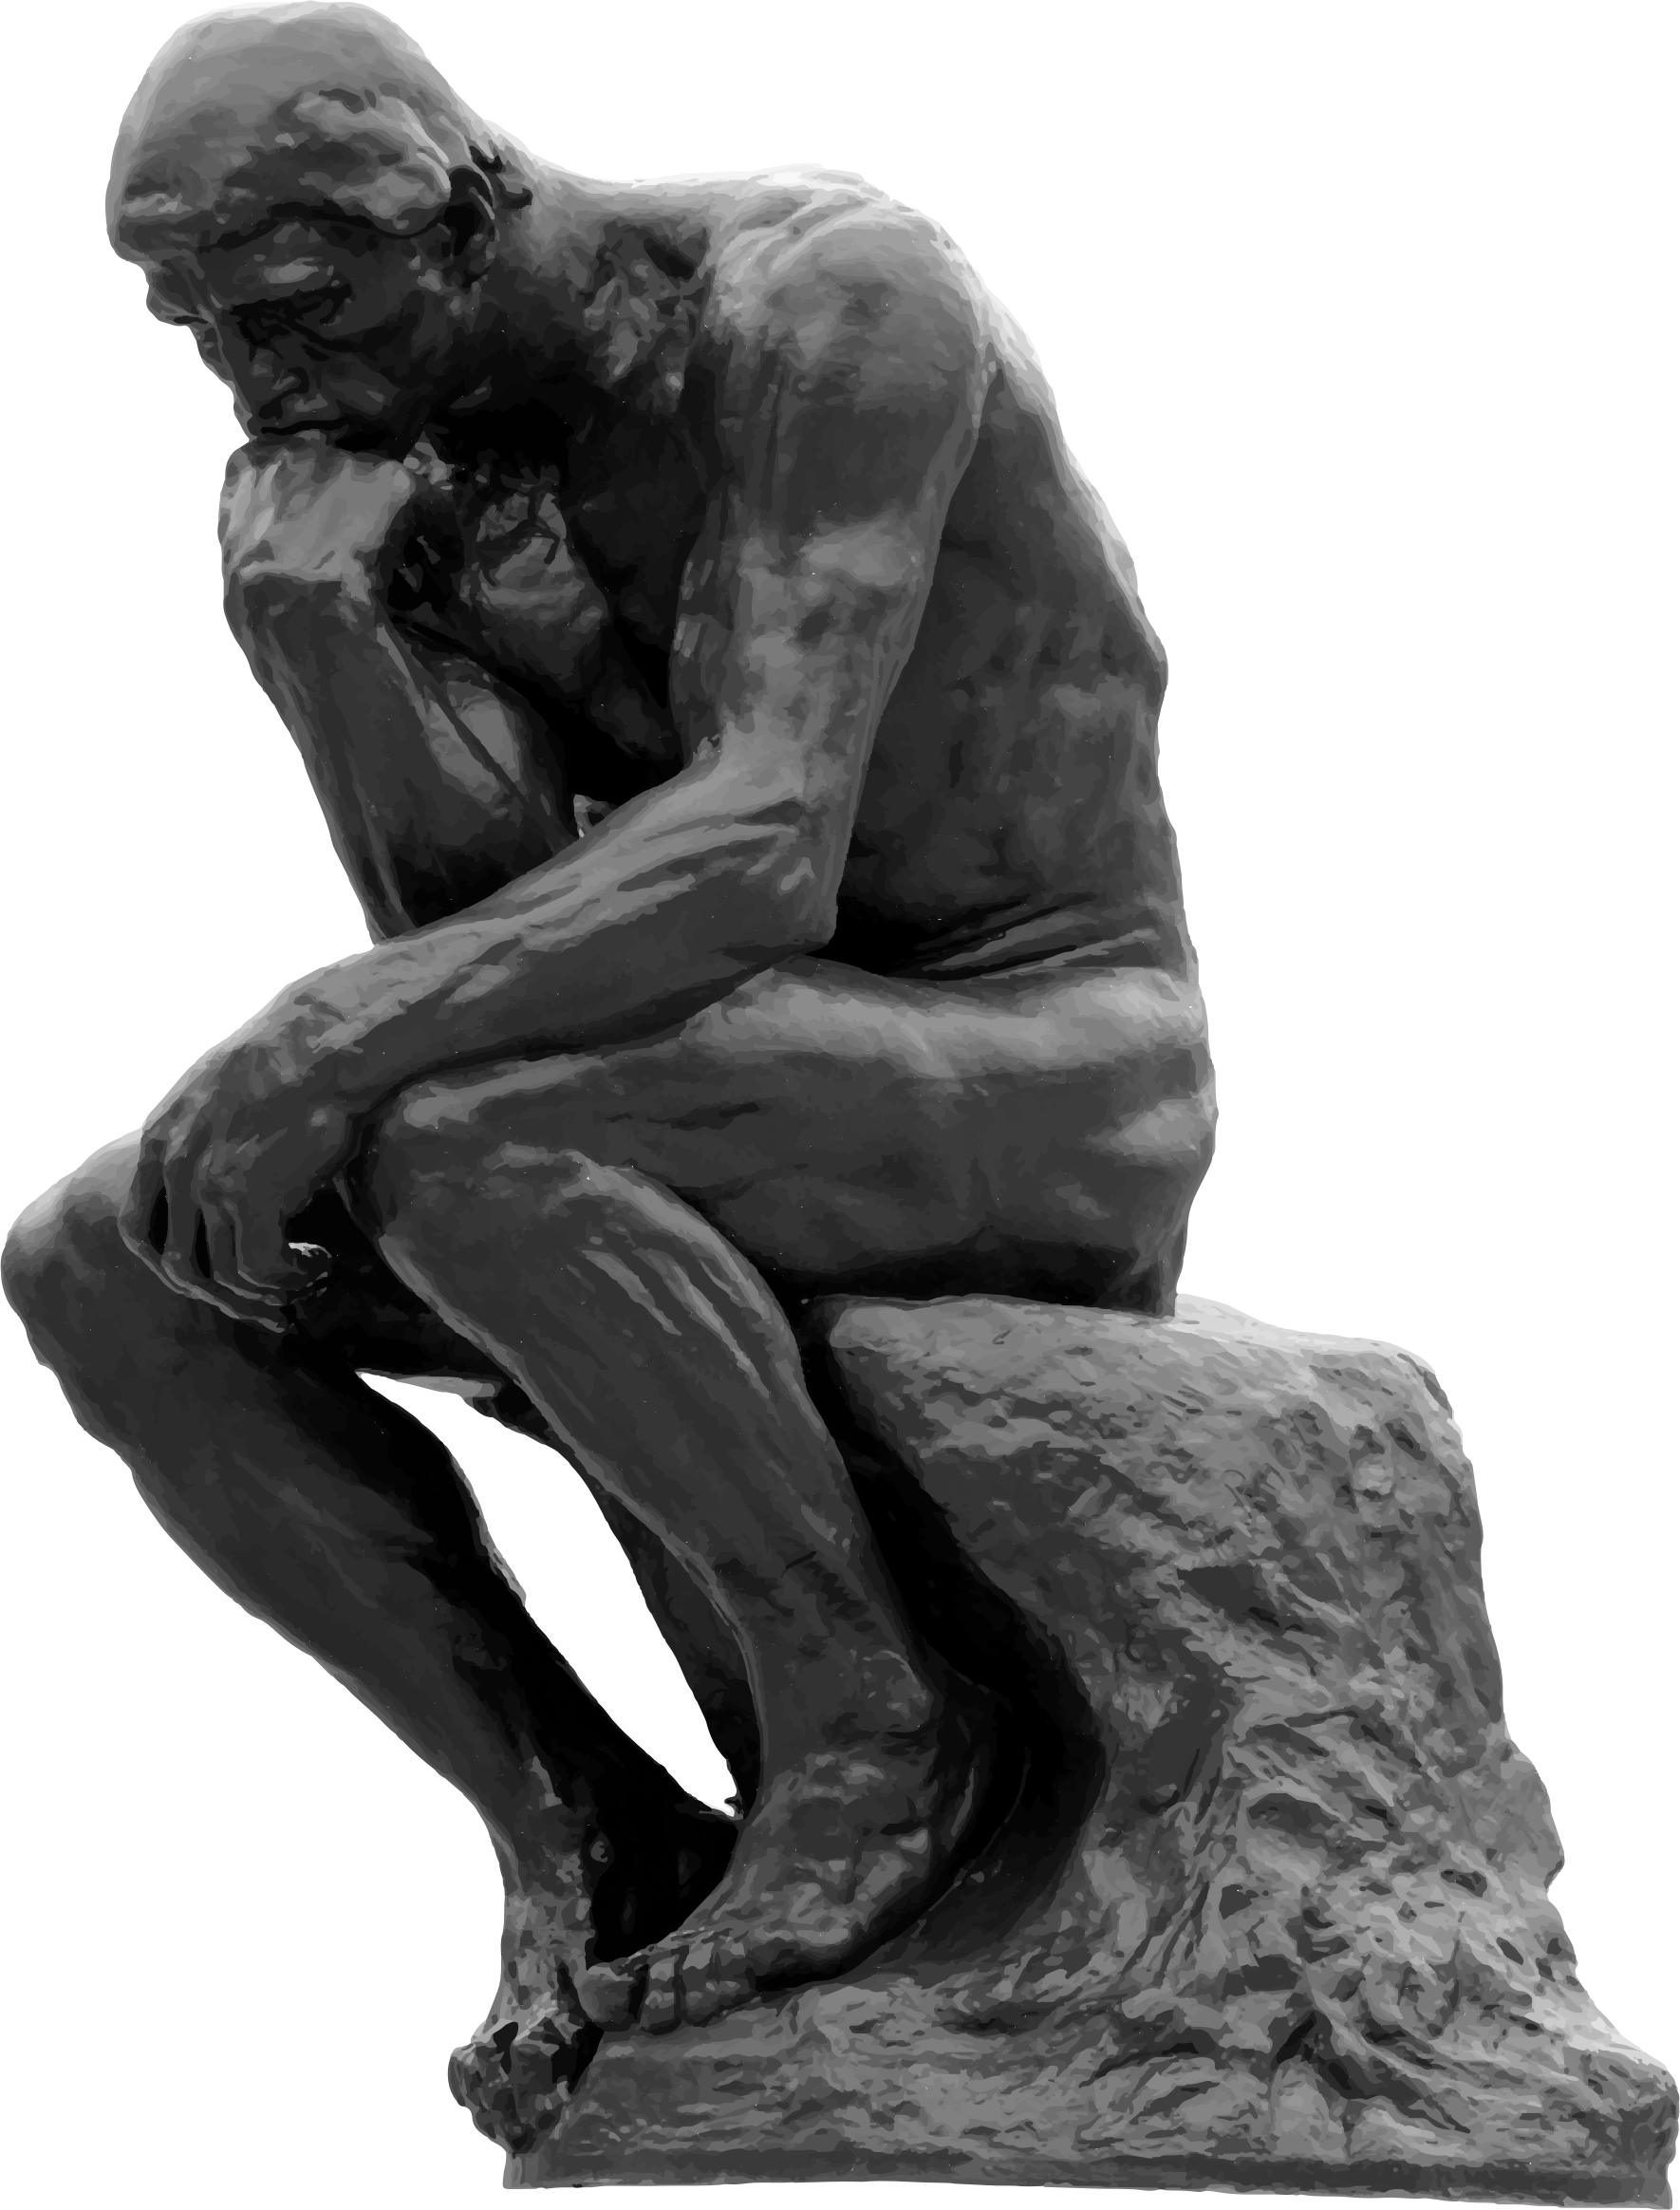 chip-ragsdale-the-thinker-statue-image